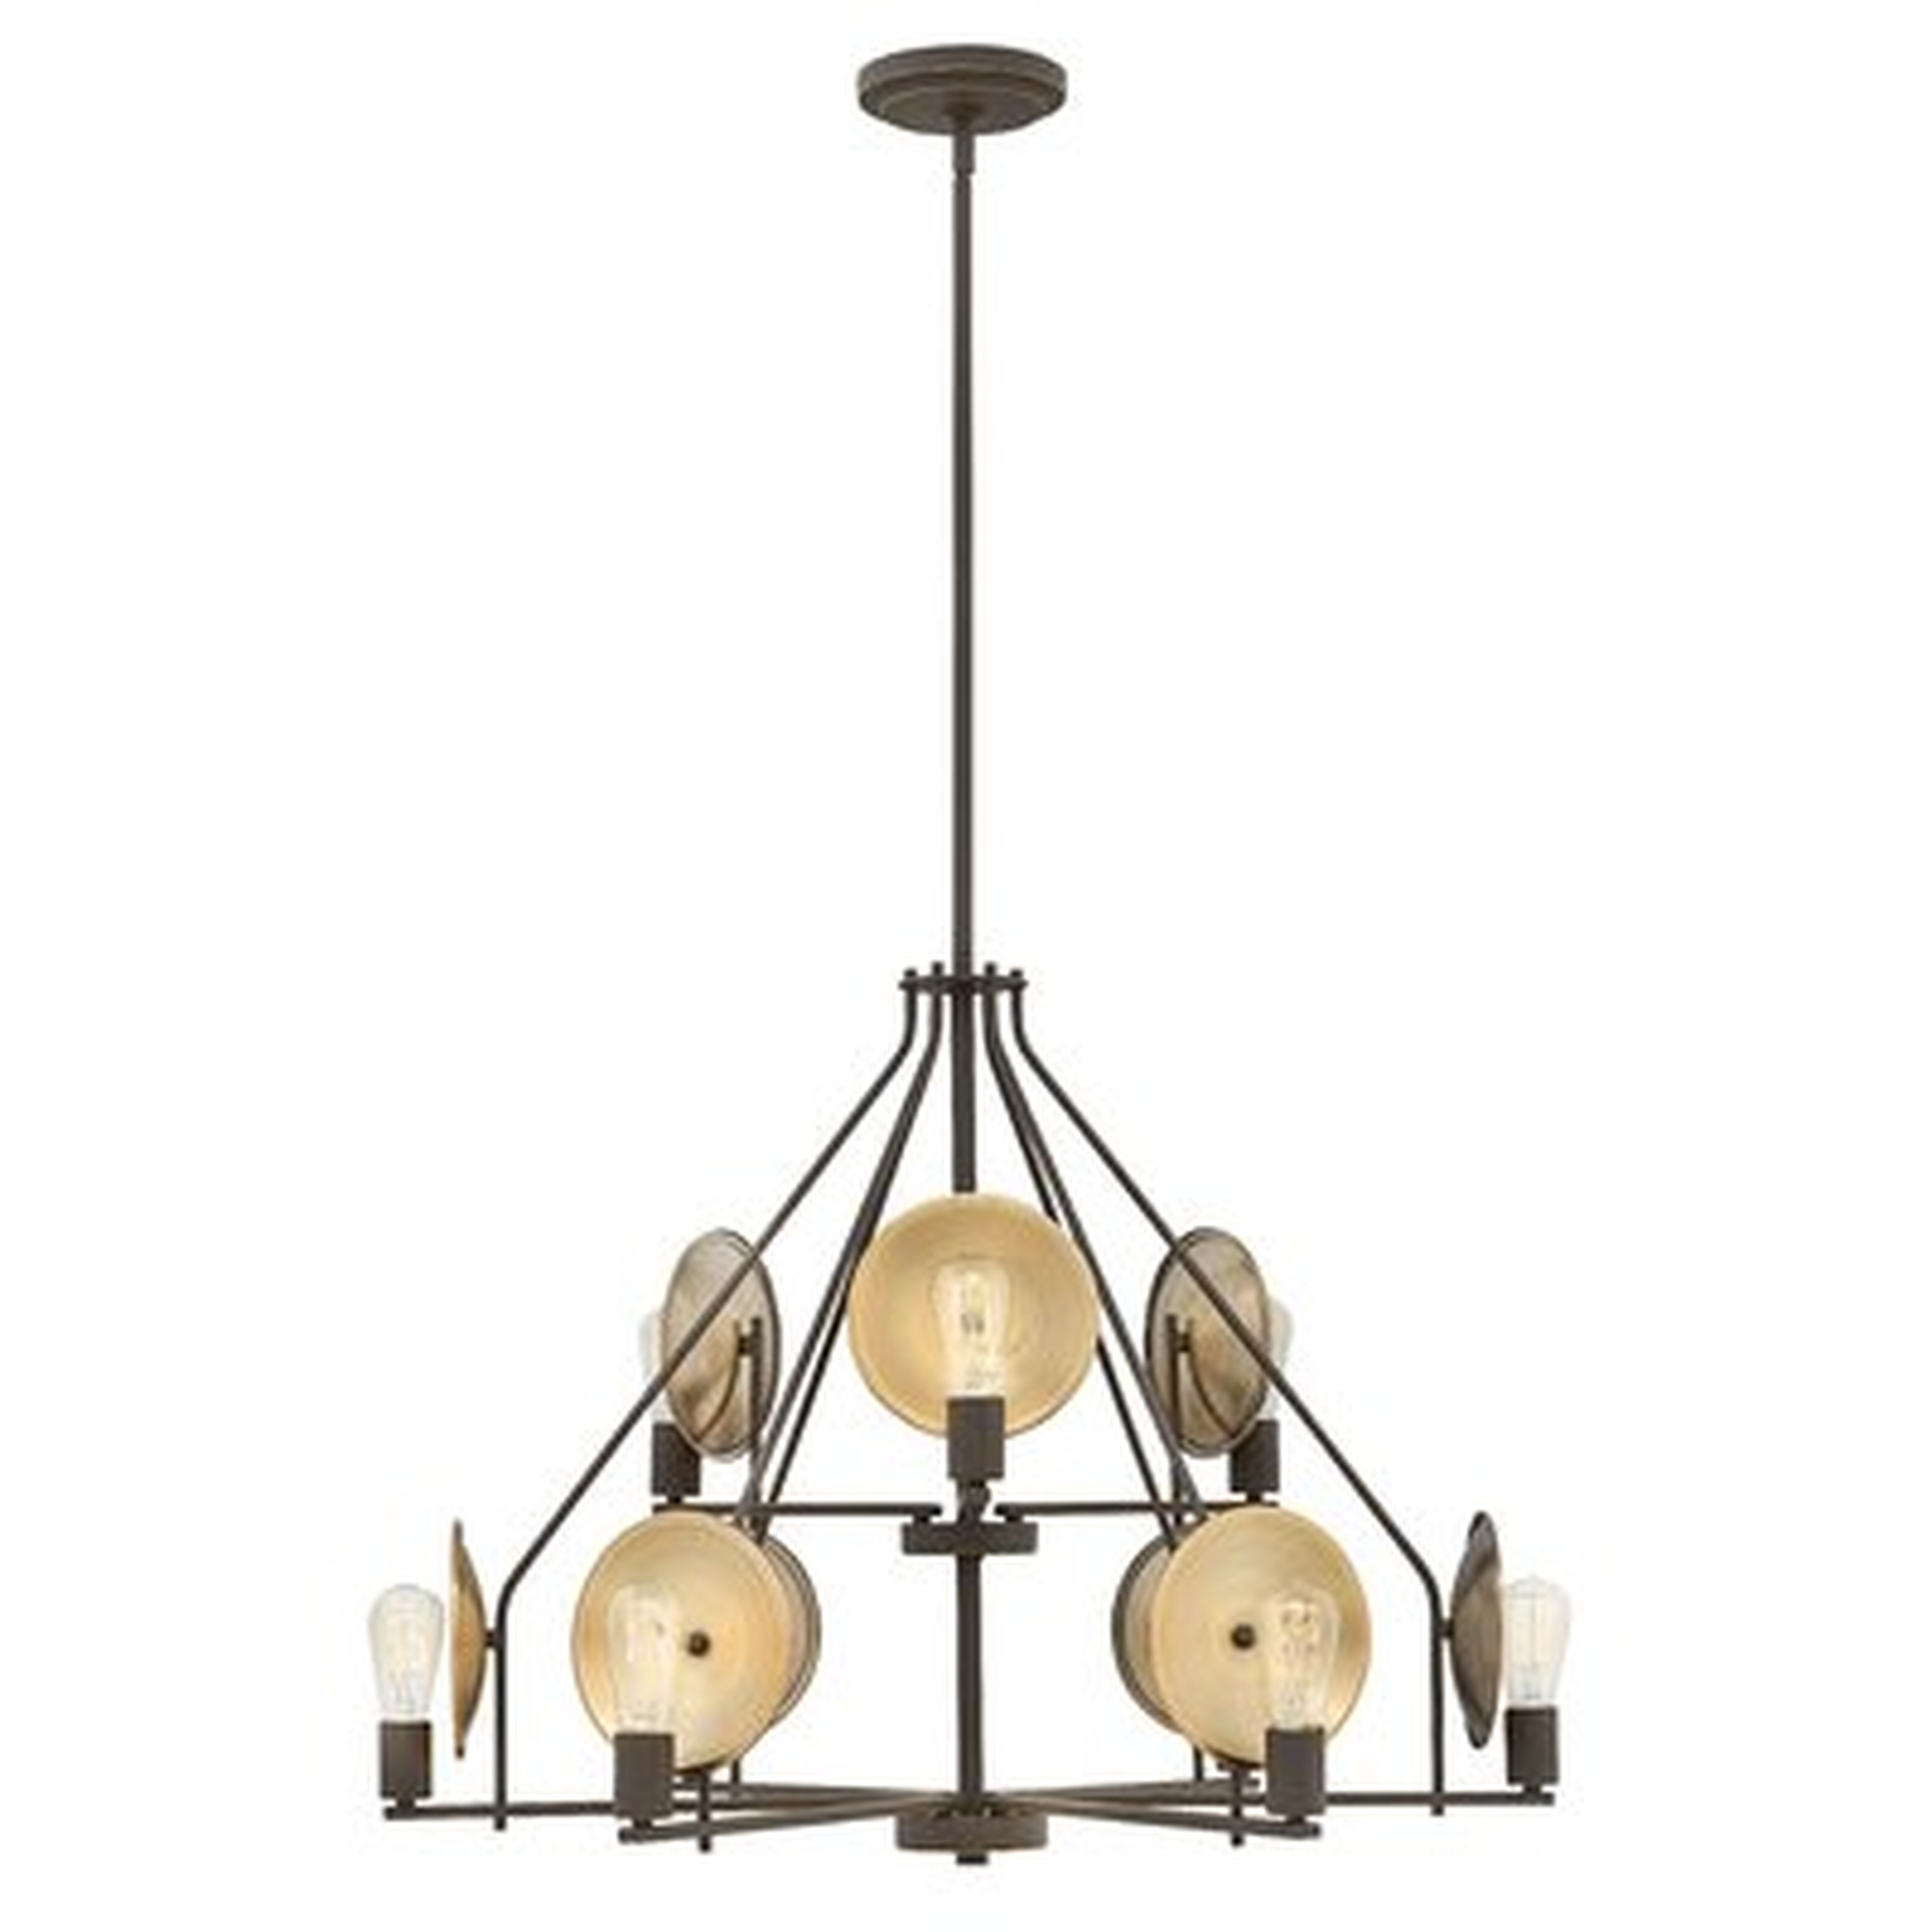 Anspach 9-Light Candle Style Tiered Chandelier - AllModern